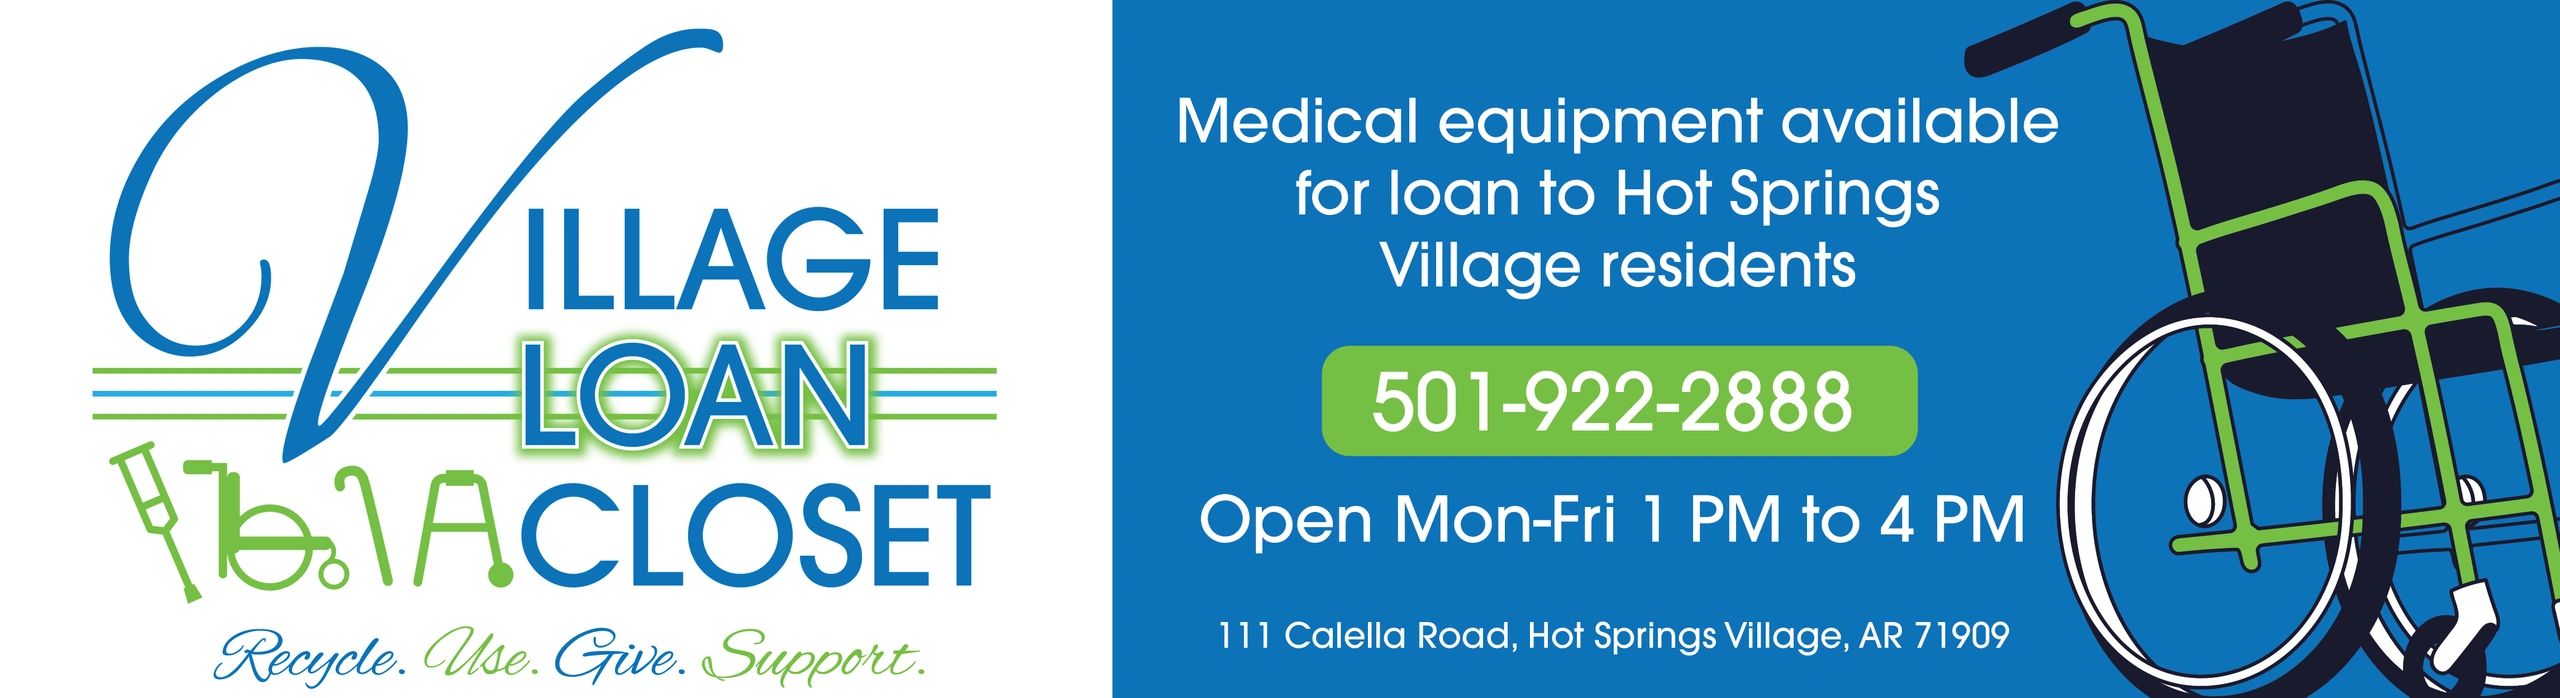 The Village Loan Closet offers medical equipment on loan to Hot Springs Village residents for free.